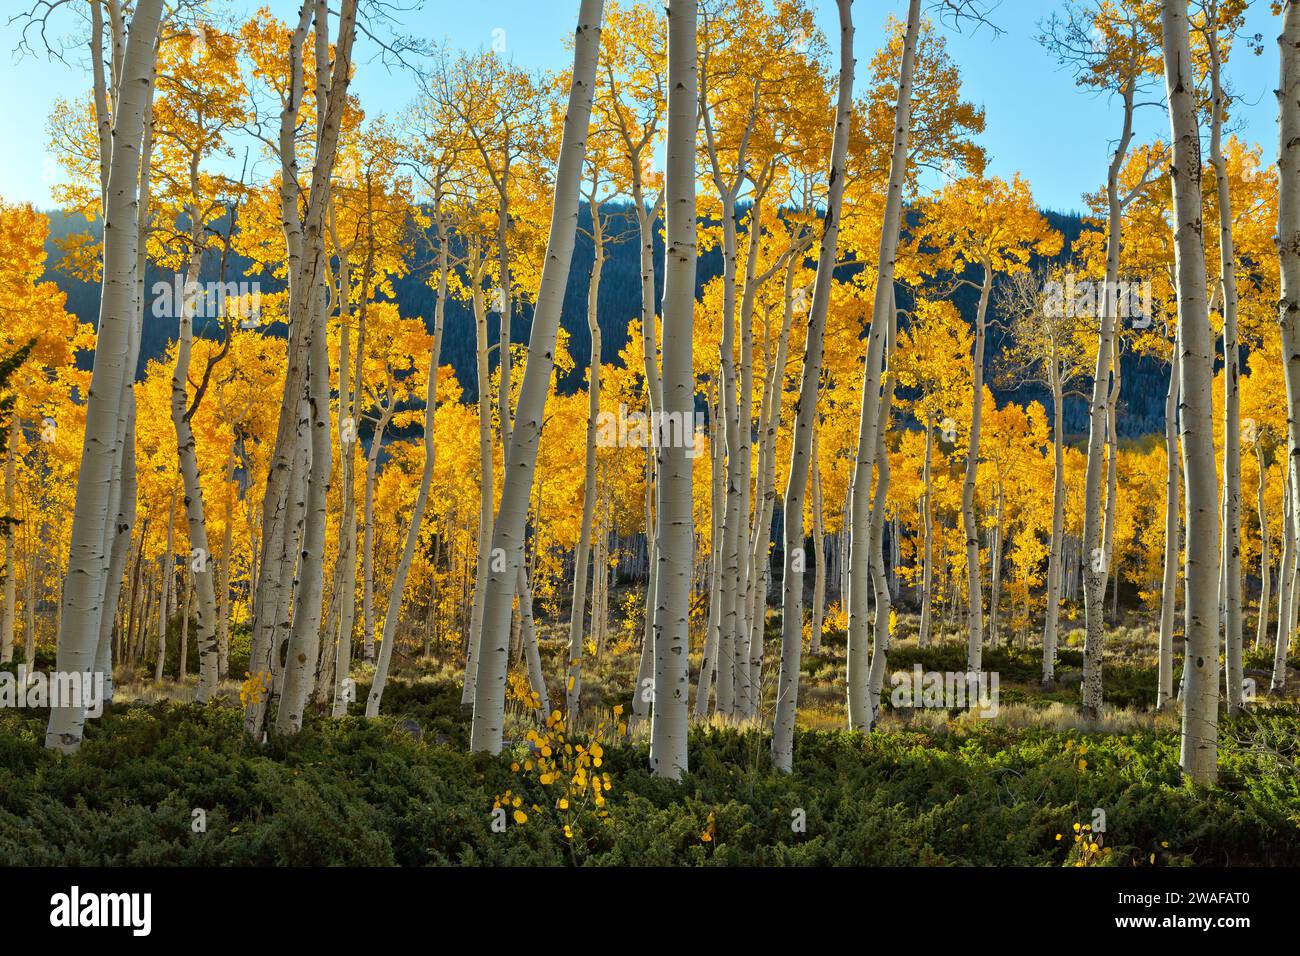 Aspens 'Pando Clone' originating from a single genetic marker, Fishlake National Forest at an elevation of 8848 ft. Wasatch Mountain Range, Utah. Stock Photo